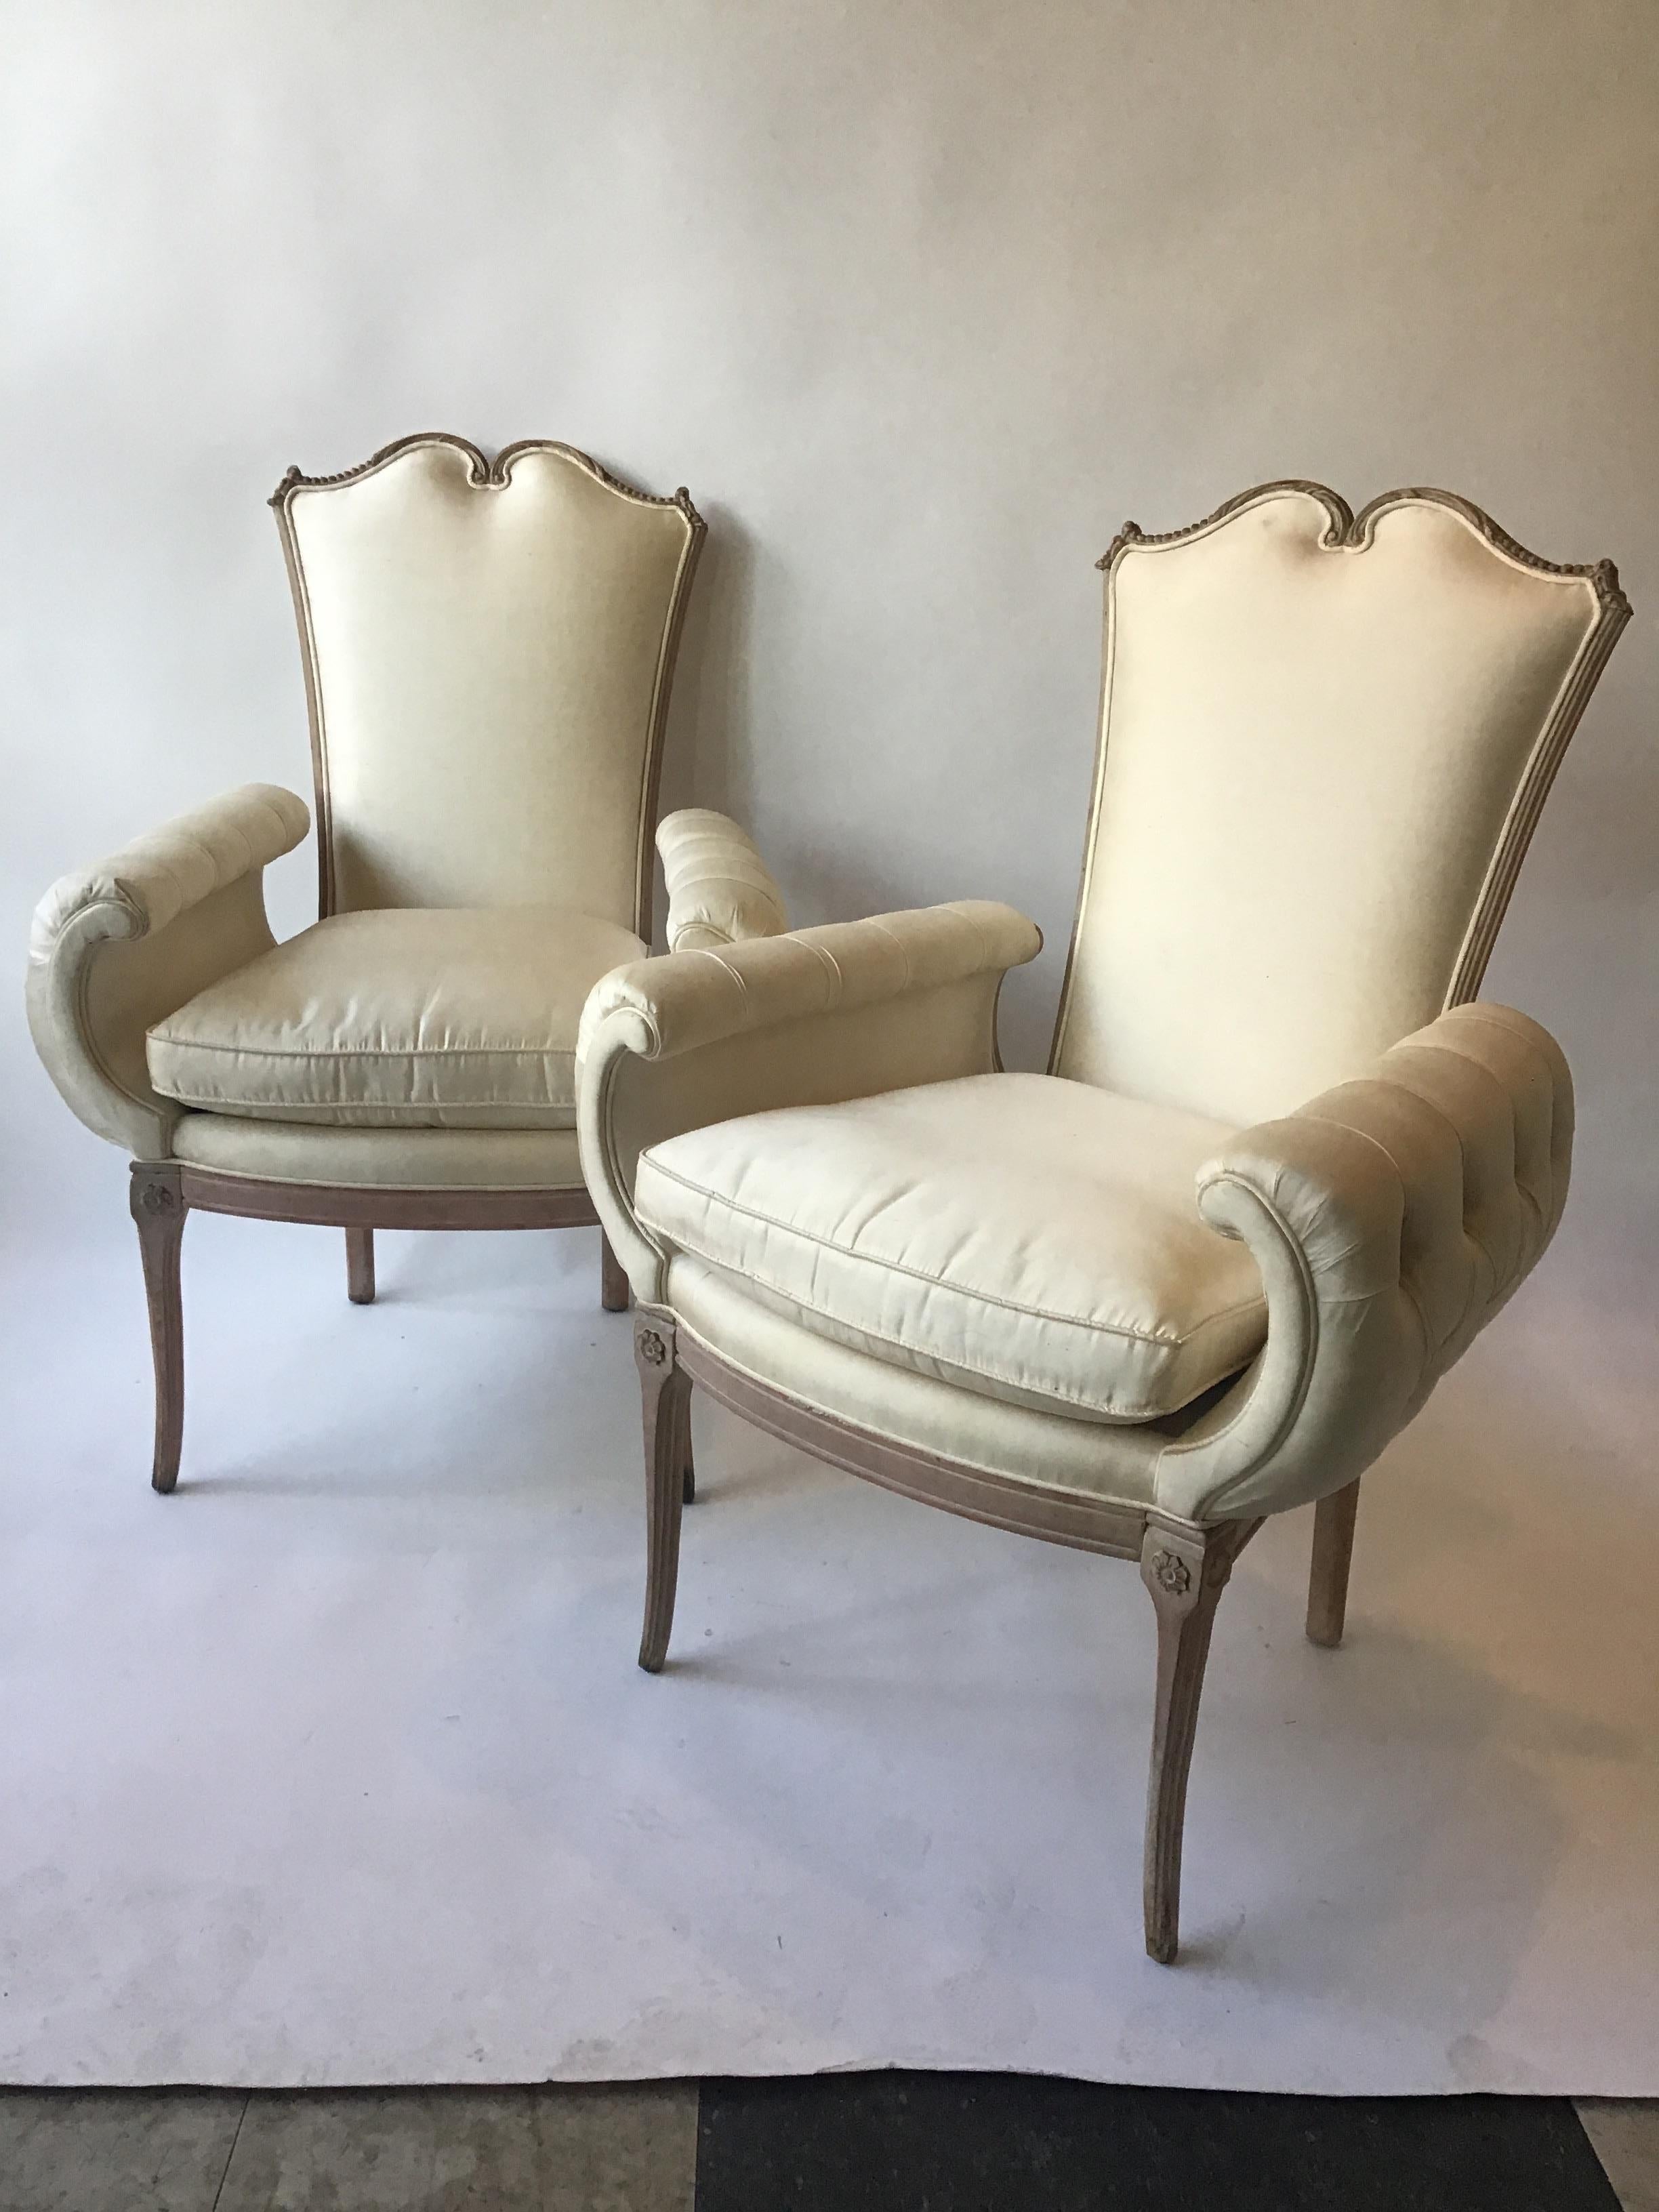 Very glam, 1940s Hollywood Regency wide, over exaggerated armchairs.